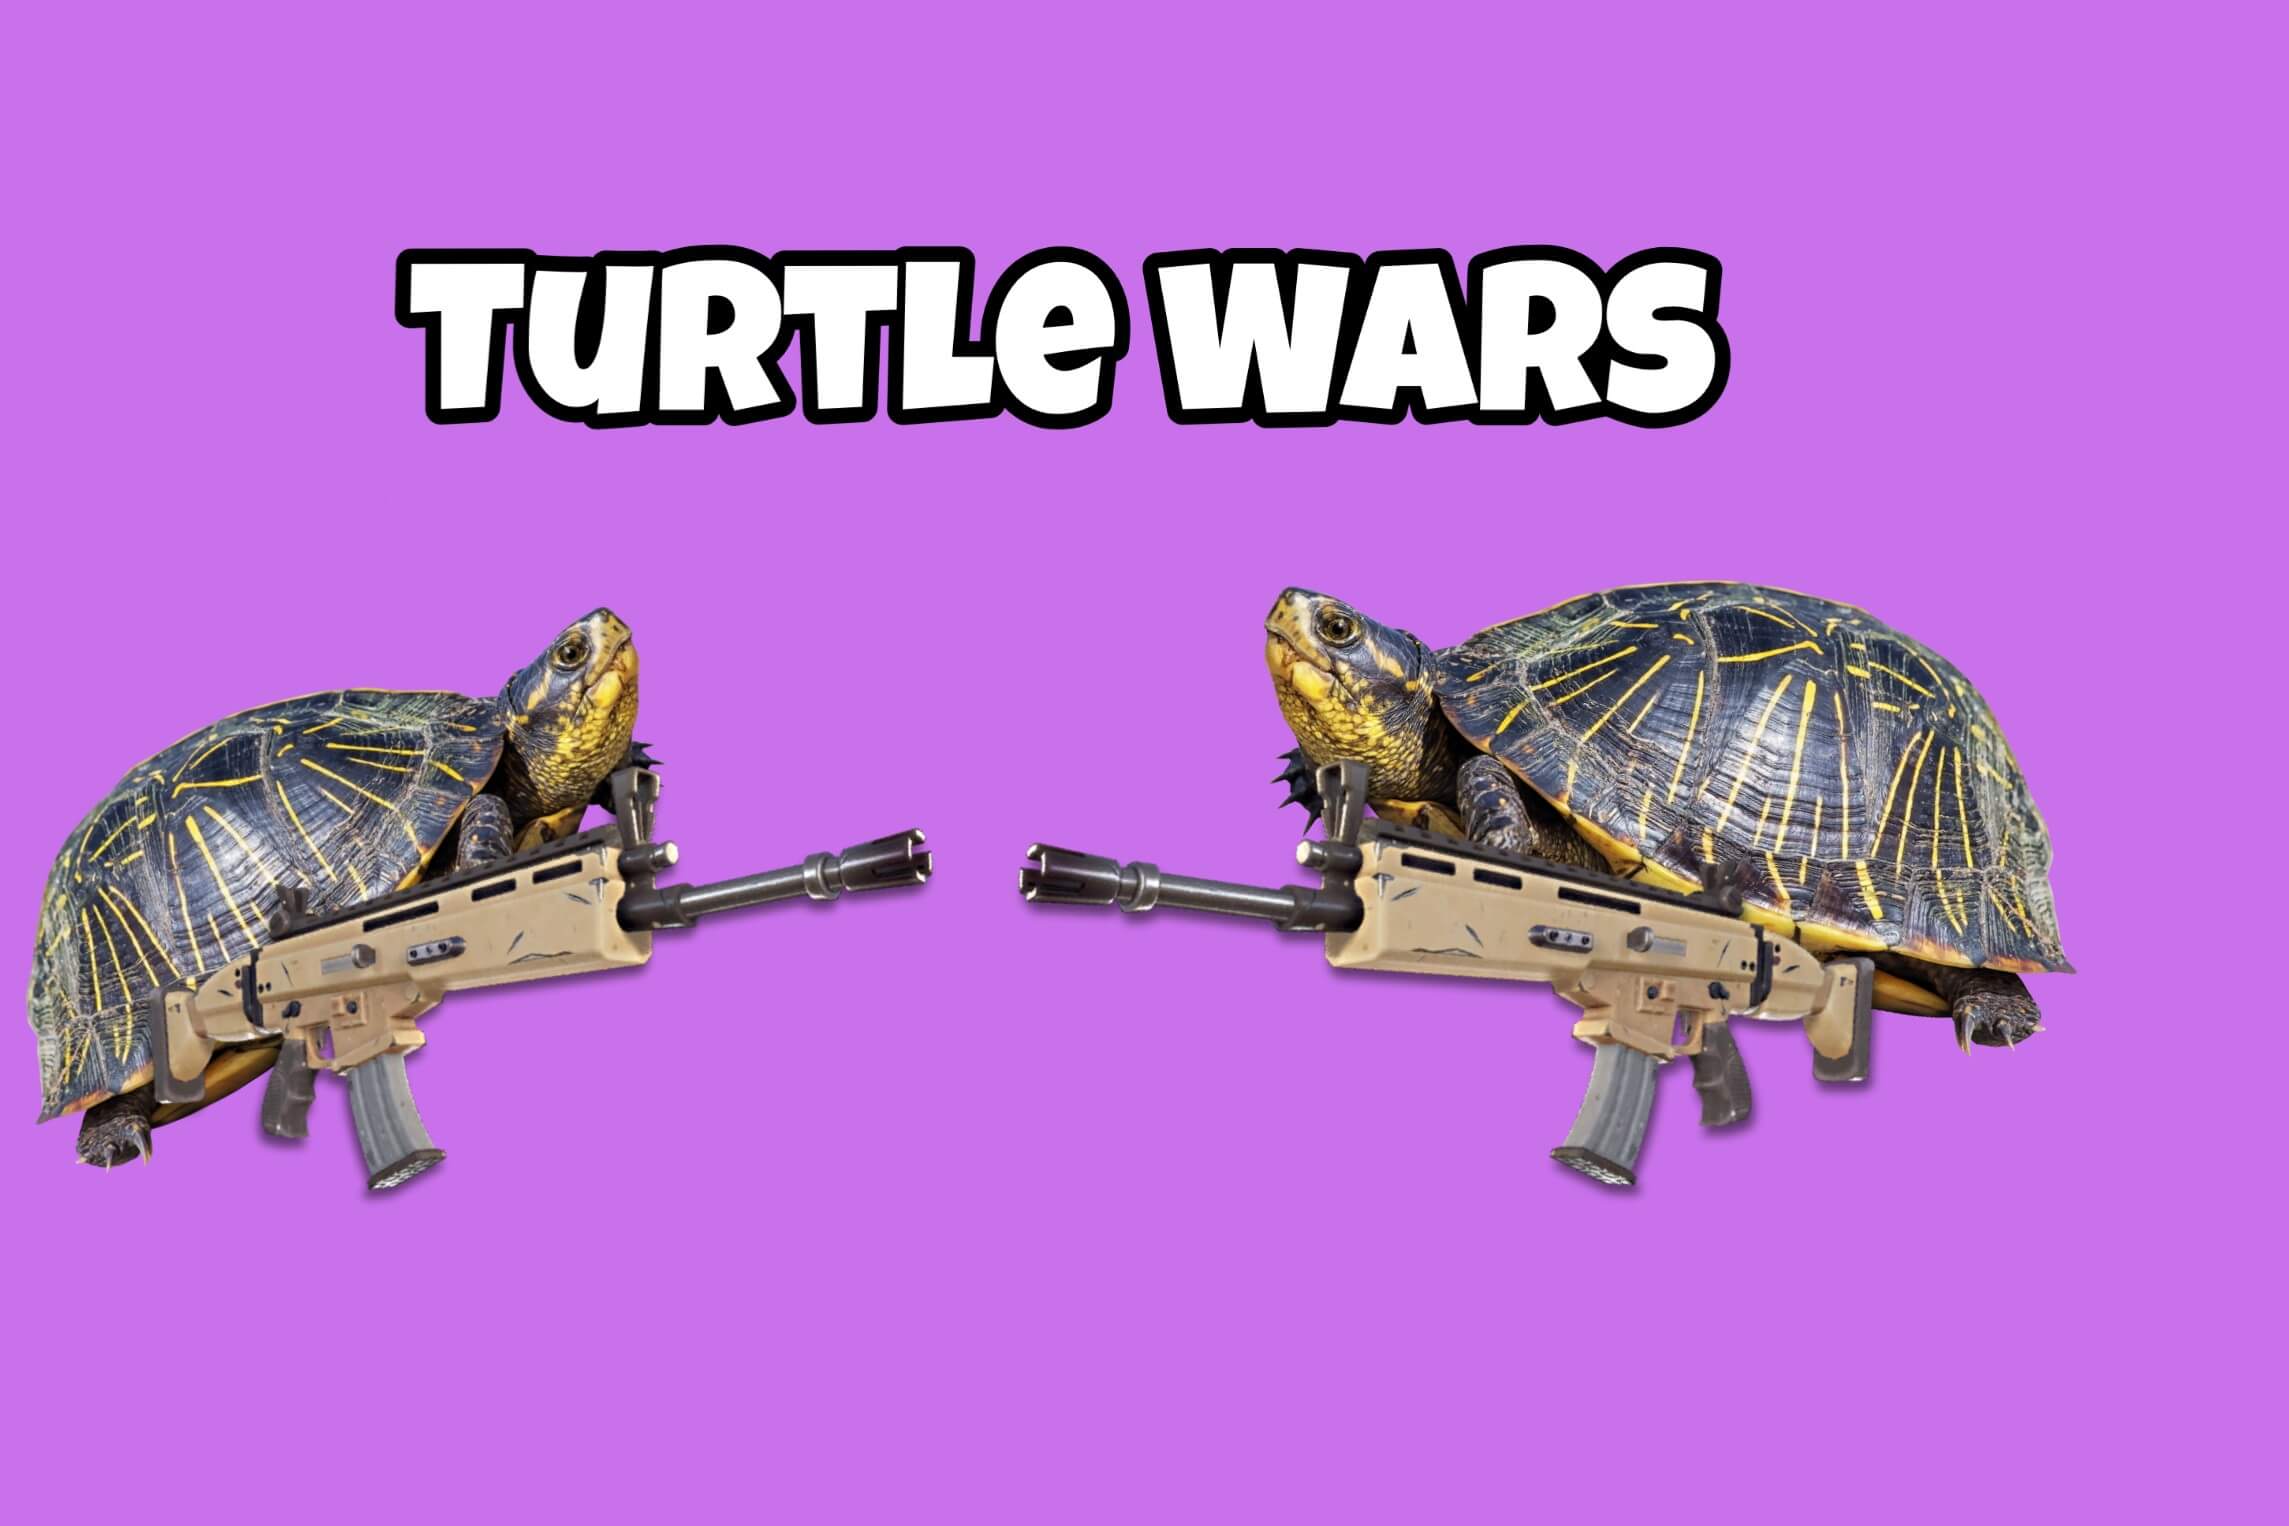 WAR OF THE TURTLES 0_0